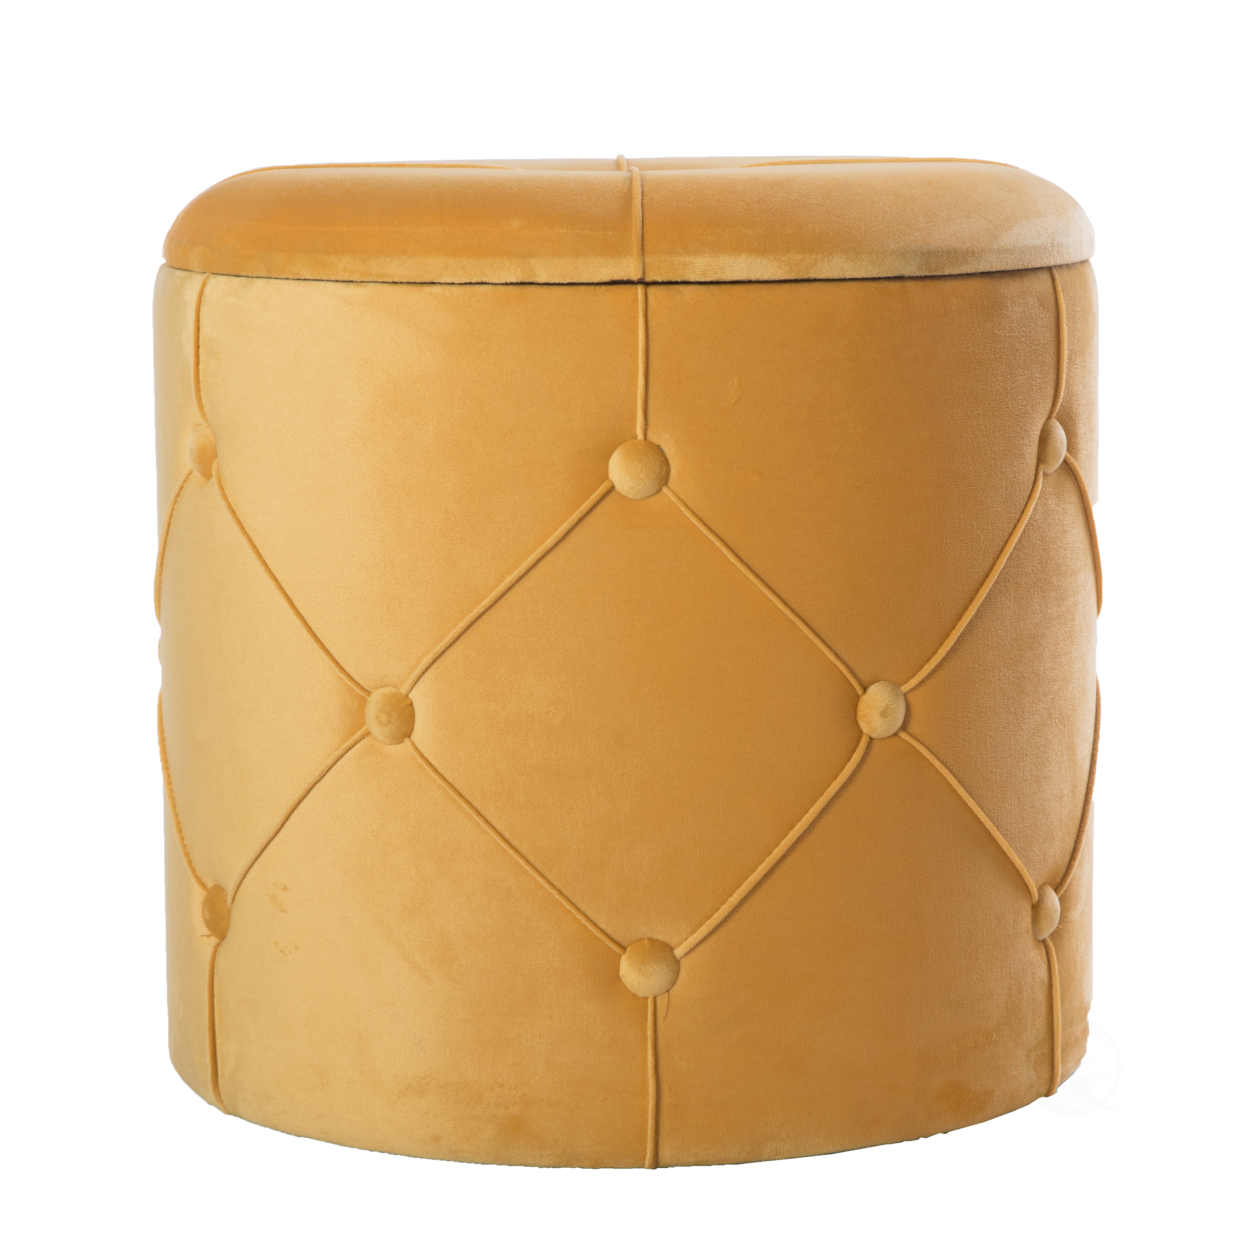 Round Tufted Velvet Wood Storage Ottoman Stool With Lid - Yellow